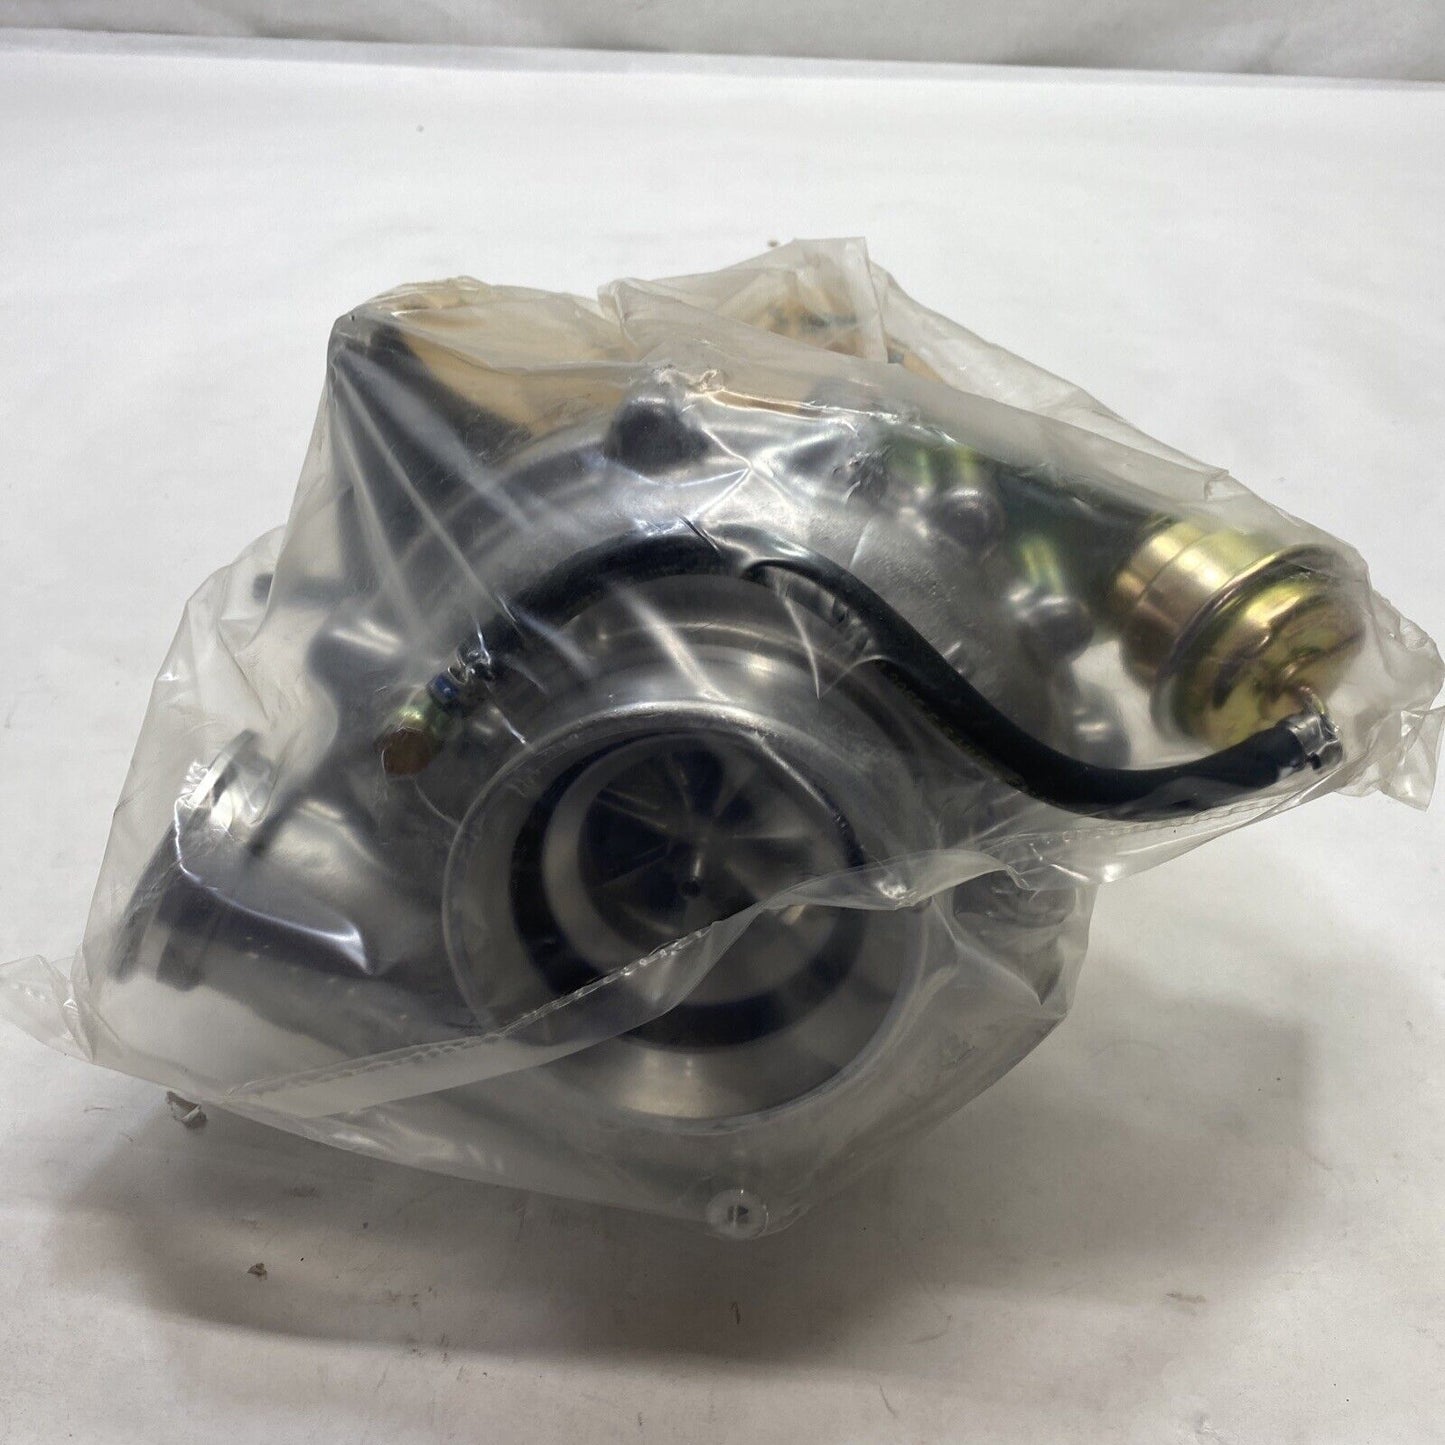 New OEM Mercedes-Benz Turbo Charger Diesel Truck 2001-2008 A9060964999